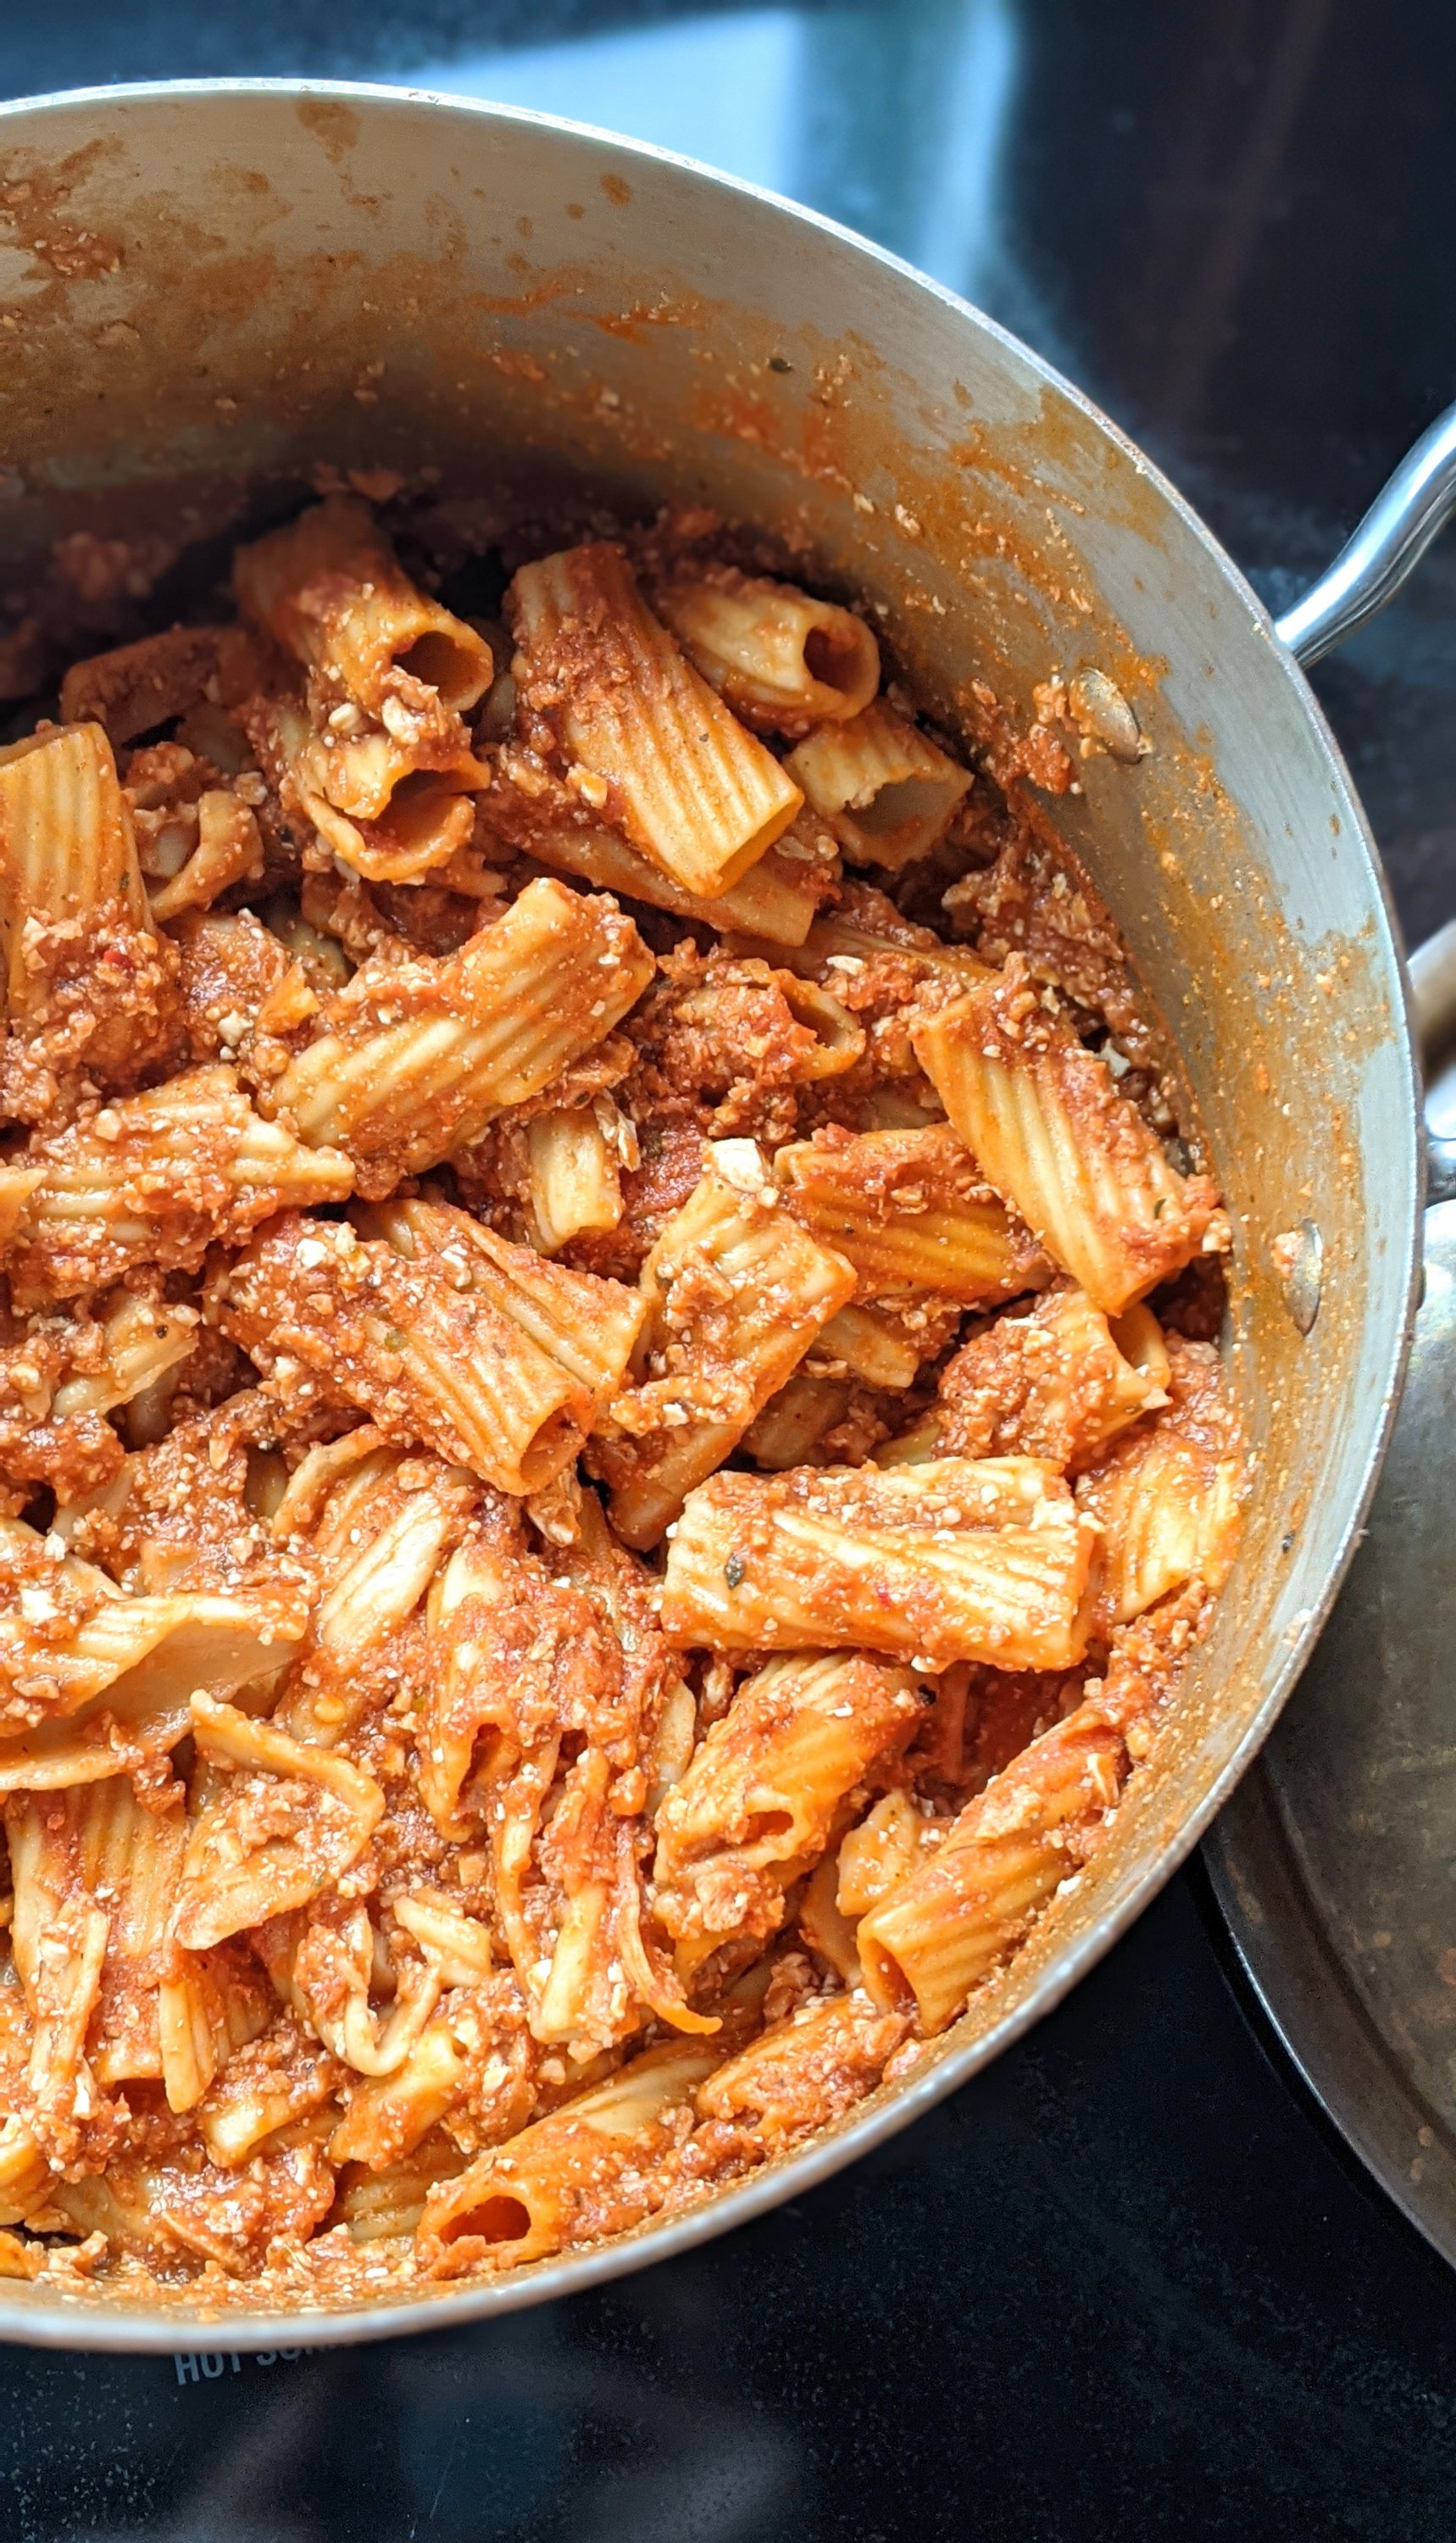 bolognese with tofu recipe vegan gluten free vegetarian meatless spag bol recipes healthy high protein vegan bolognese sauce recipes for pasta